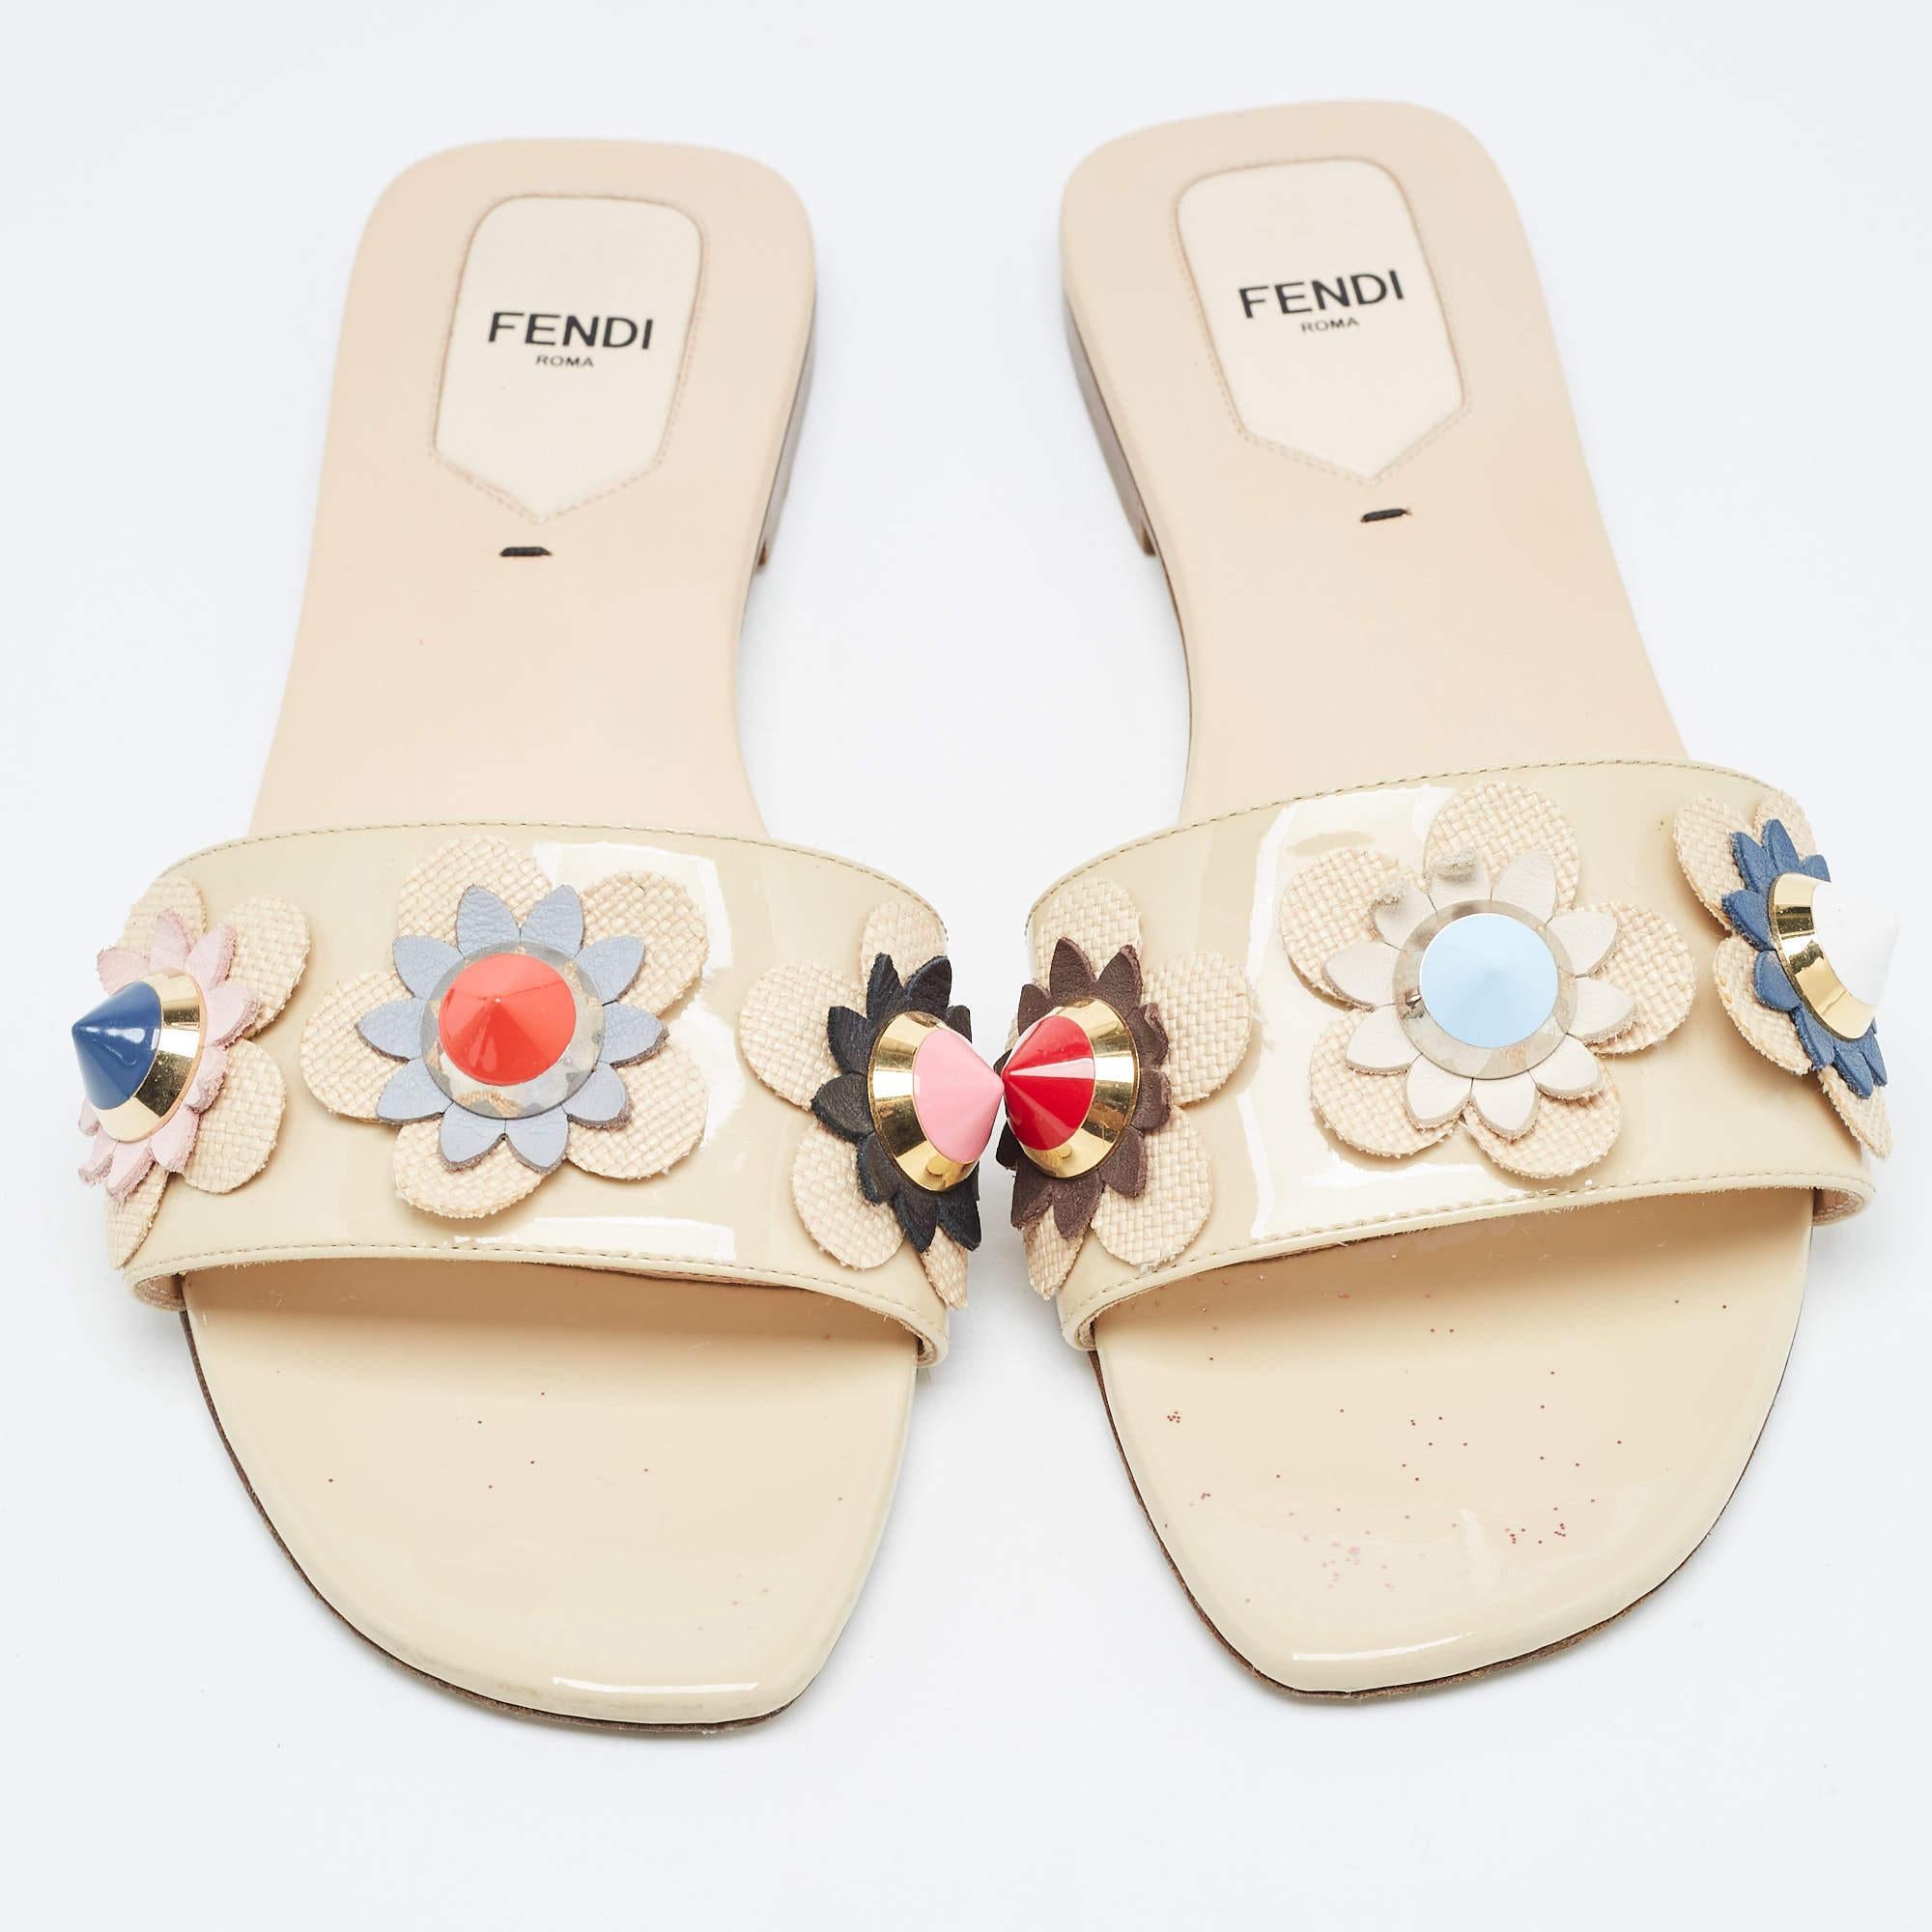 These well-crafted designer flats from Fendi have got you covered for all-day plans. They come in a pretty design, and they look great on the feet.

Includes: Original Dustbag, Original Box, Info Booklet